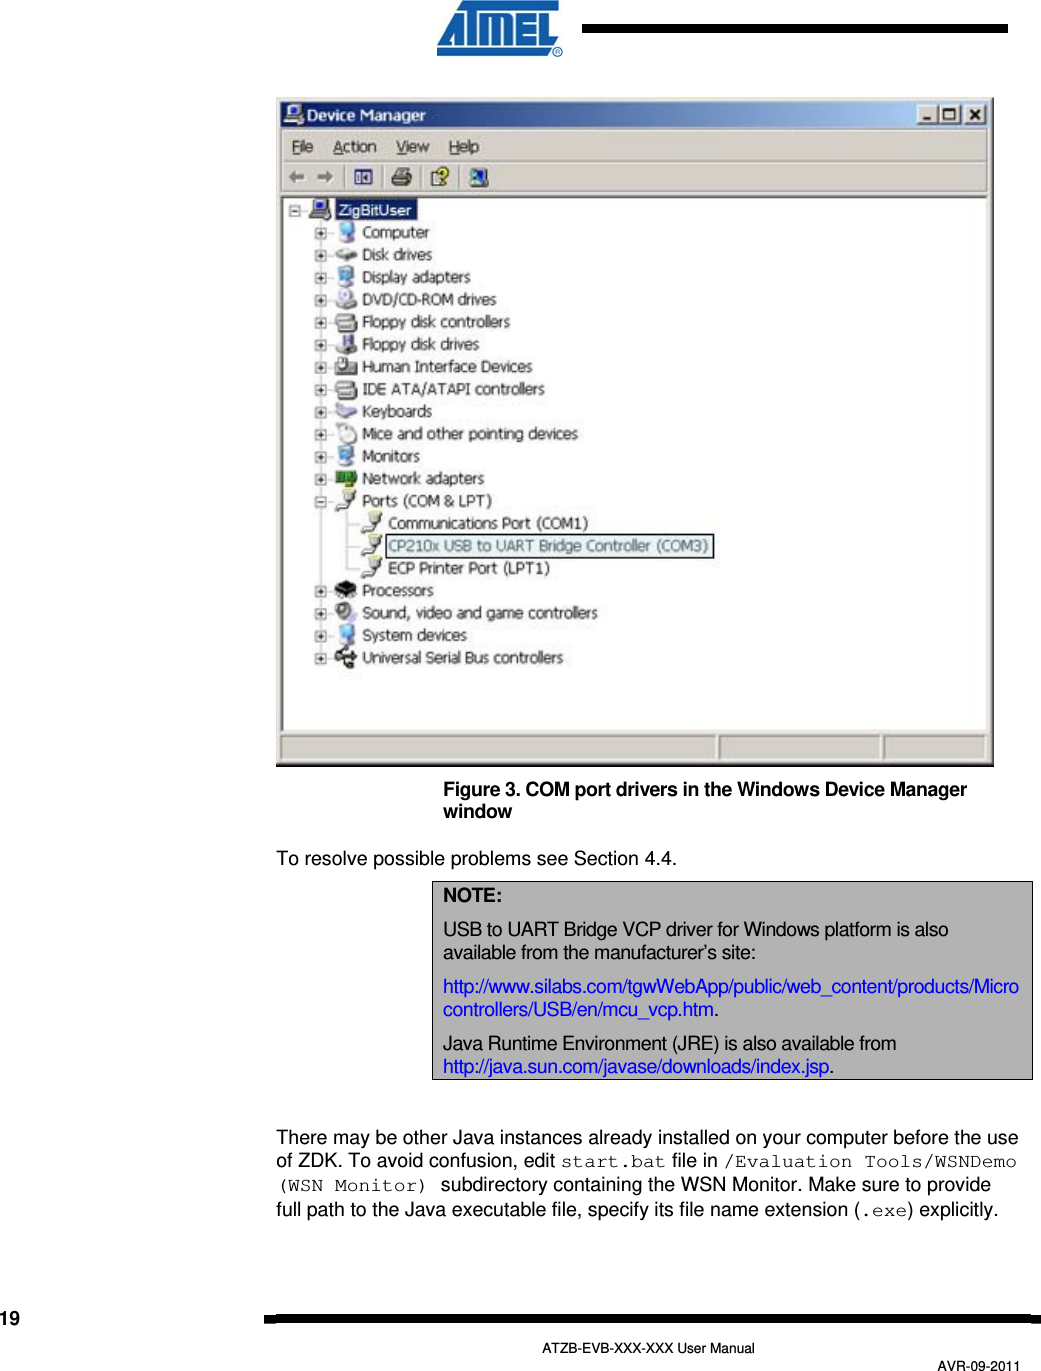   19   ATZB-EVB-XXX-XXX User Manual AVR-09-2011   Figure 3. COM port drivers in the Windows Device Manager window To resolve possible problems see Section  4.4. NOTE: USB to UART Bridge VCP driver for Windows platform is also available from the manufacturer’s site: http://www.silabs.com/tgwWebApp/public/web_content/products/Microcontrollers/USB/en/mcu_vcp.htm. Java Runtime Environment (JRE) is also available from http://java.sun.com/javase/downloads/index.jsp.  There may be other Java instances already installed on your computer before the use of ZDK. To avoid confusion, edit start.bat file in /Evaluation Tools/WSNDemo (WSN Monitor) subdirectory containing the WSN Monitor. Make sure to provide full path to the Java executable file, specify its file name extension (.exe) explicitly. 